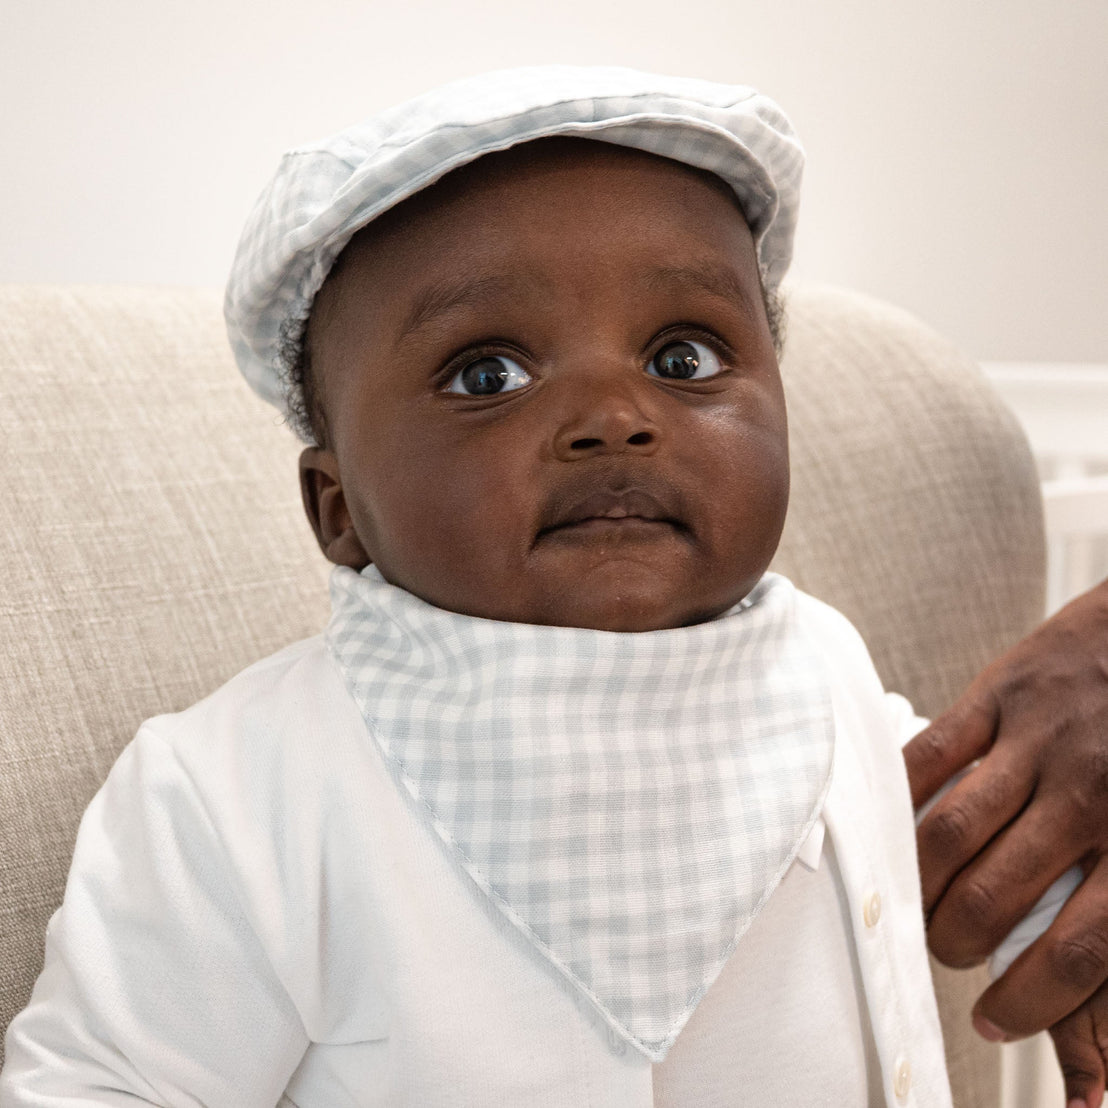 A baby dressed in a traditional white outfit with an Isla Bandana Bib and a vintage light hat looks curiously at the camera.